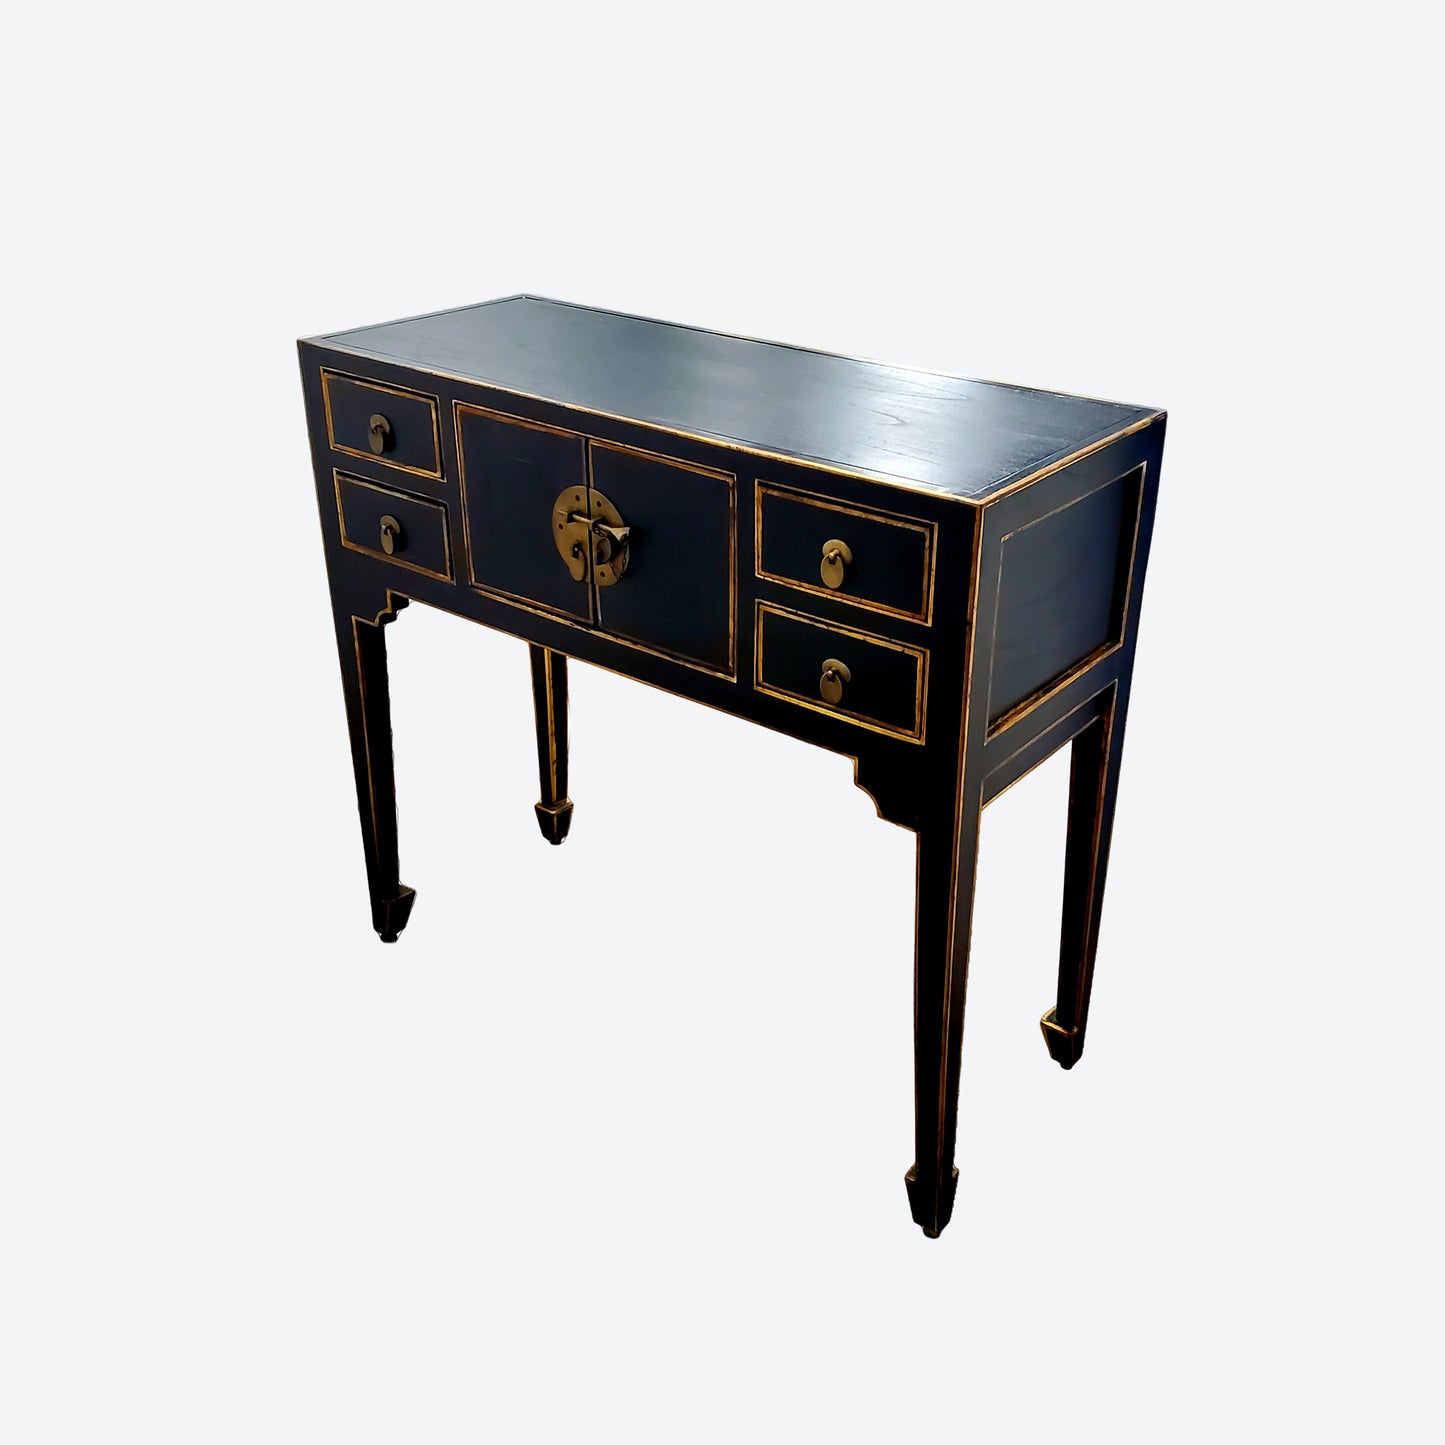 Black Center Console Table With Gold Accents And Key Hardware -SK (SKU 1169)